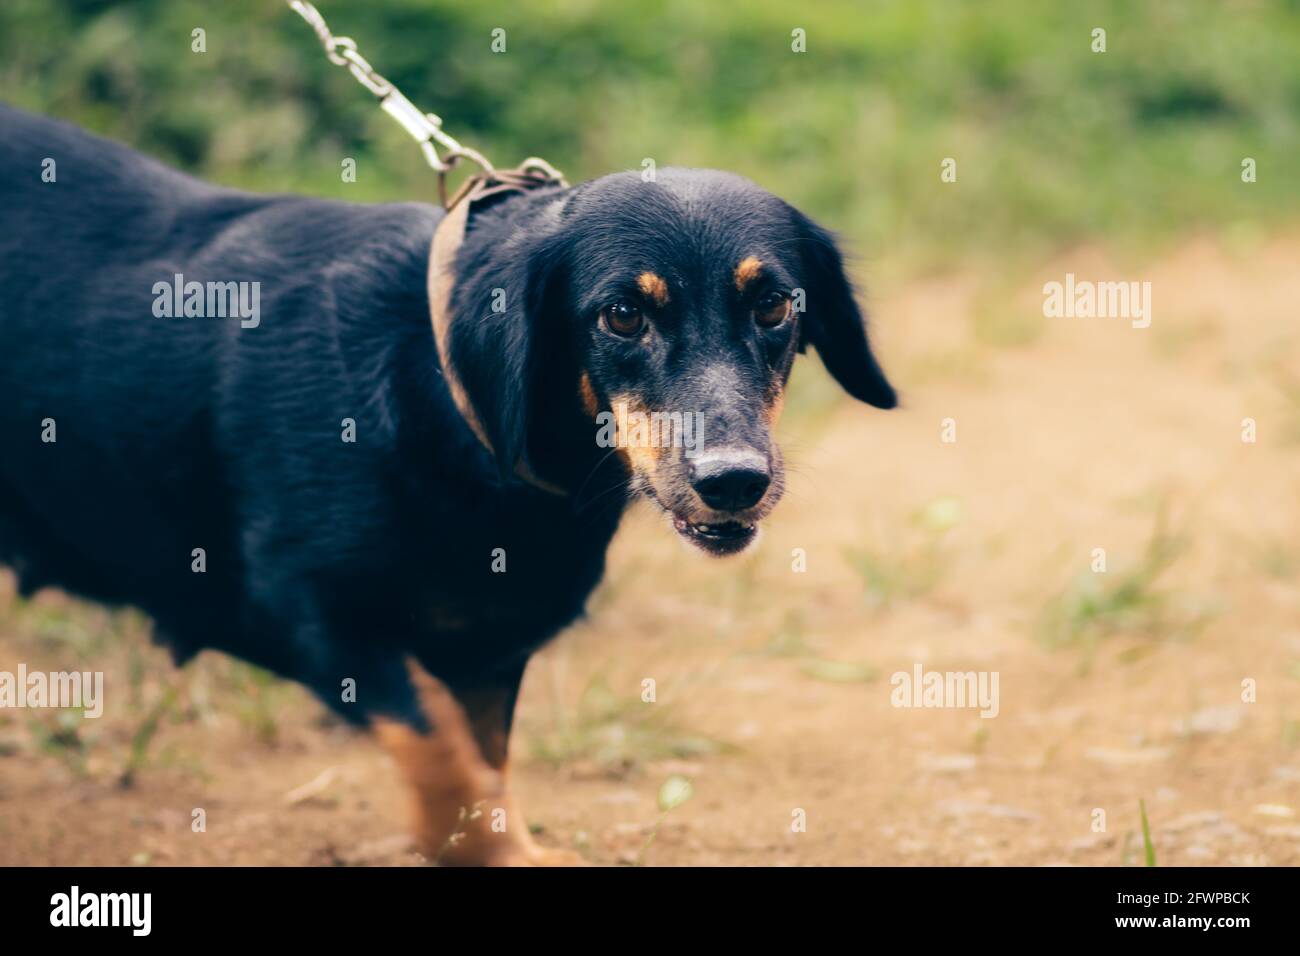 Owner and the wiener dog on the leash taking a walk outside. Stock Photo